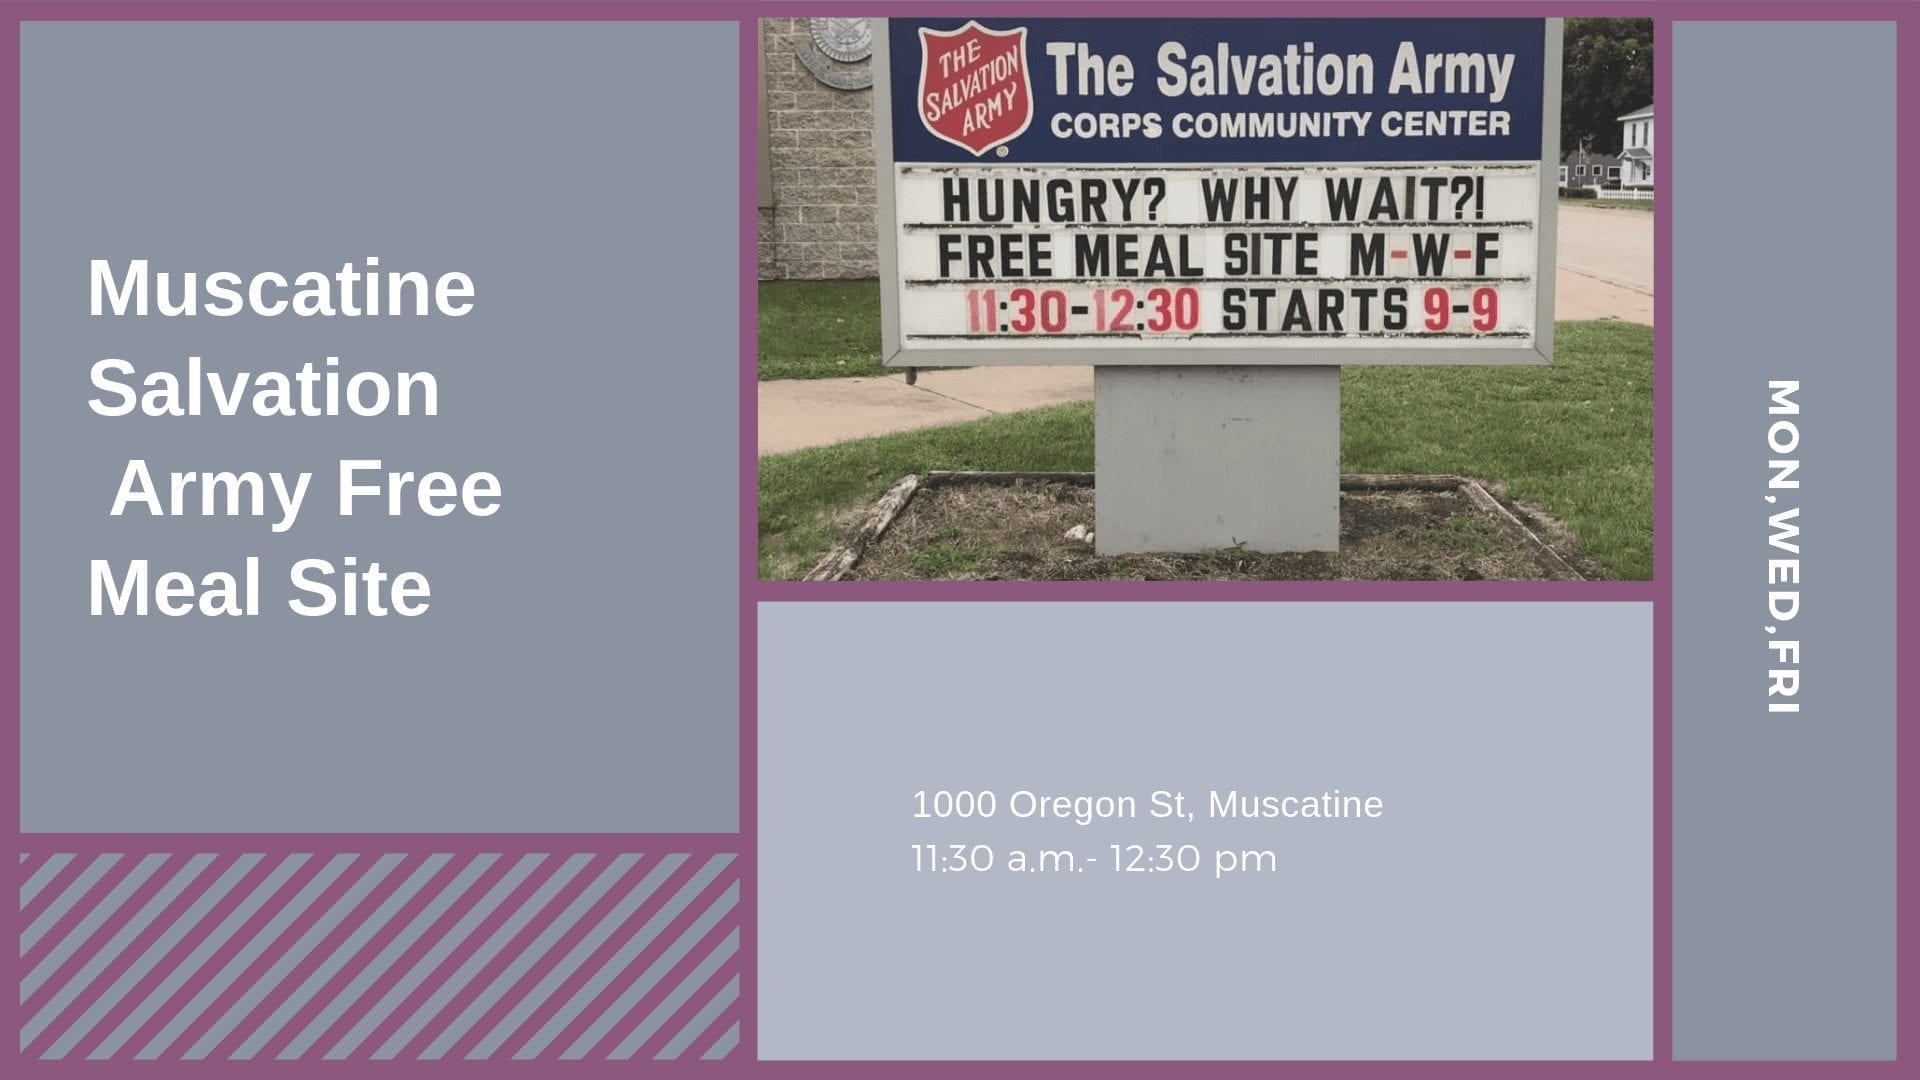 Muscatine Salvation Army Free Meal Site